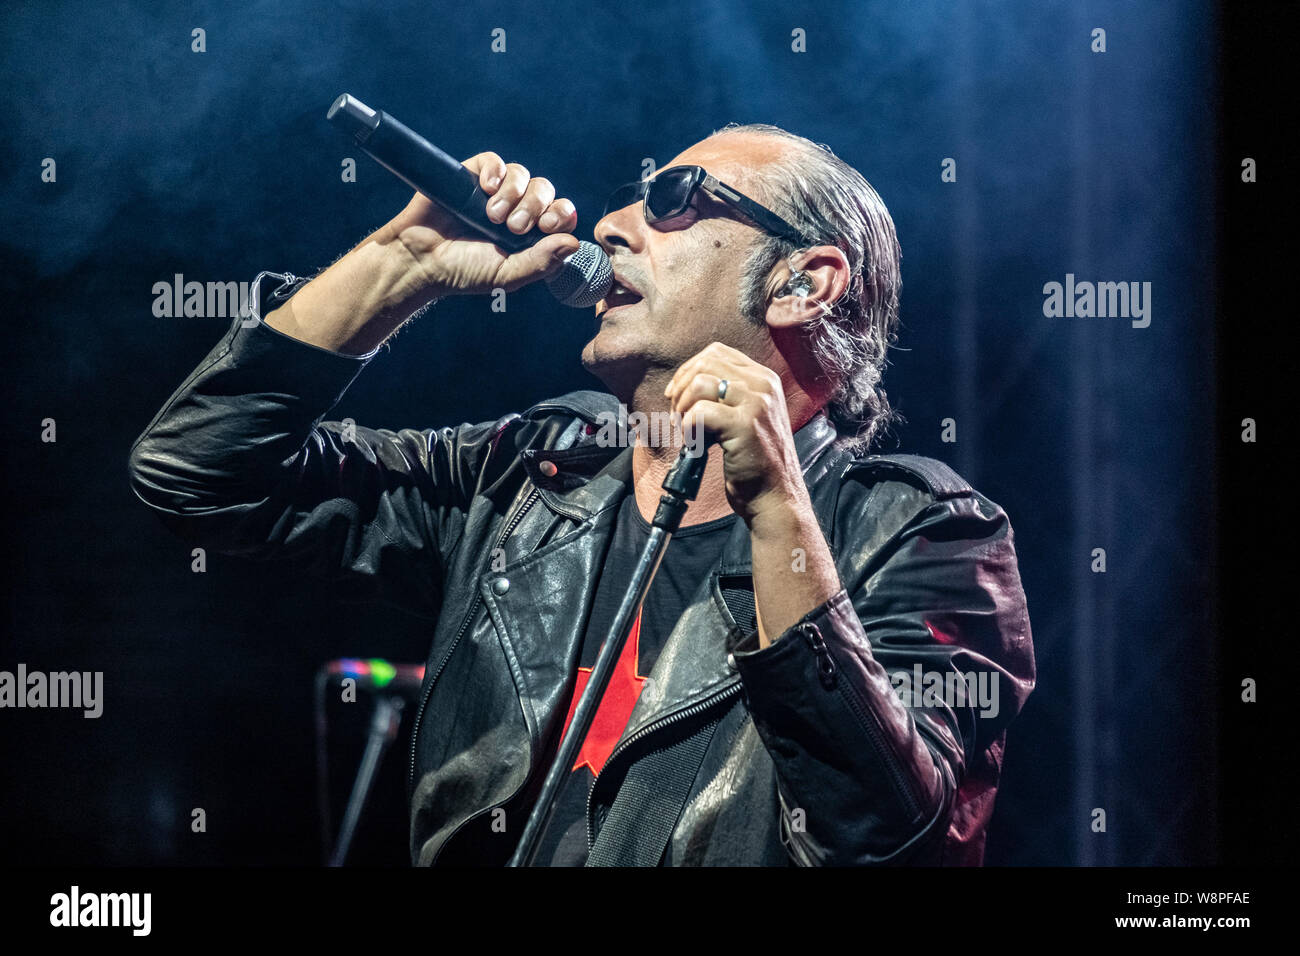 Italian singer and songwriter Luca Carboni, performs live on stage at Cantina dei Colli Ripani in Ripatransone during his “Sputnik Tour 2019”. Stock Photo